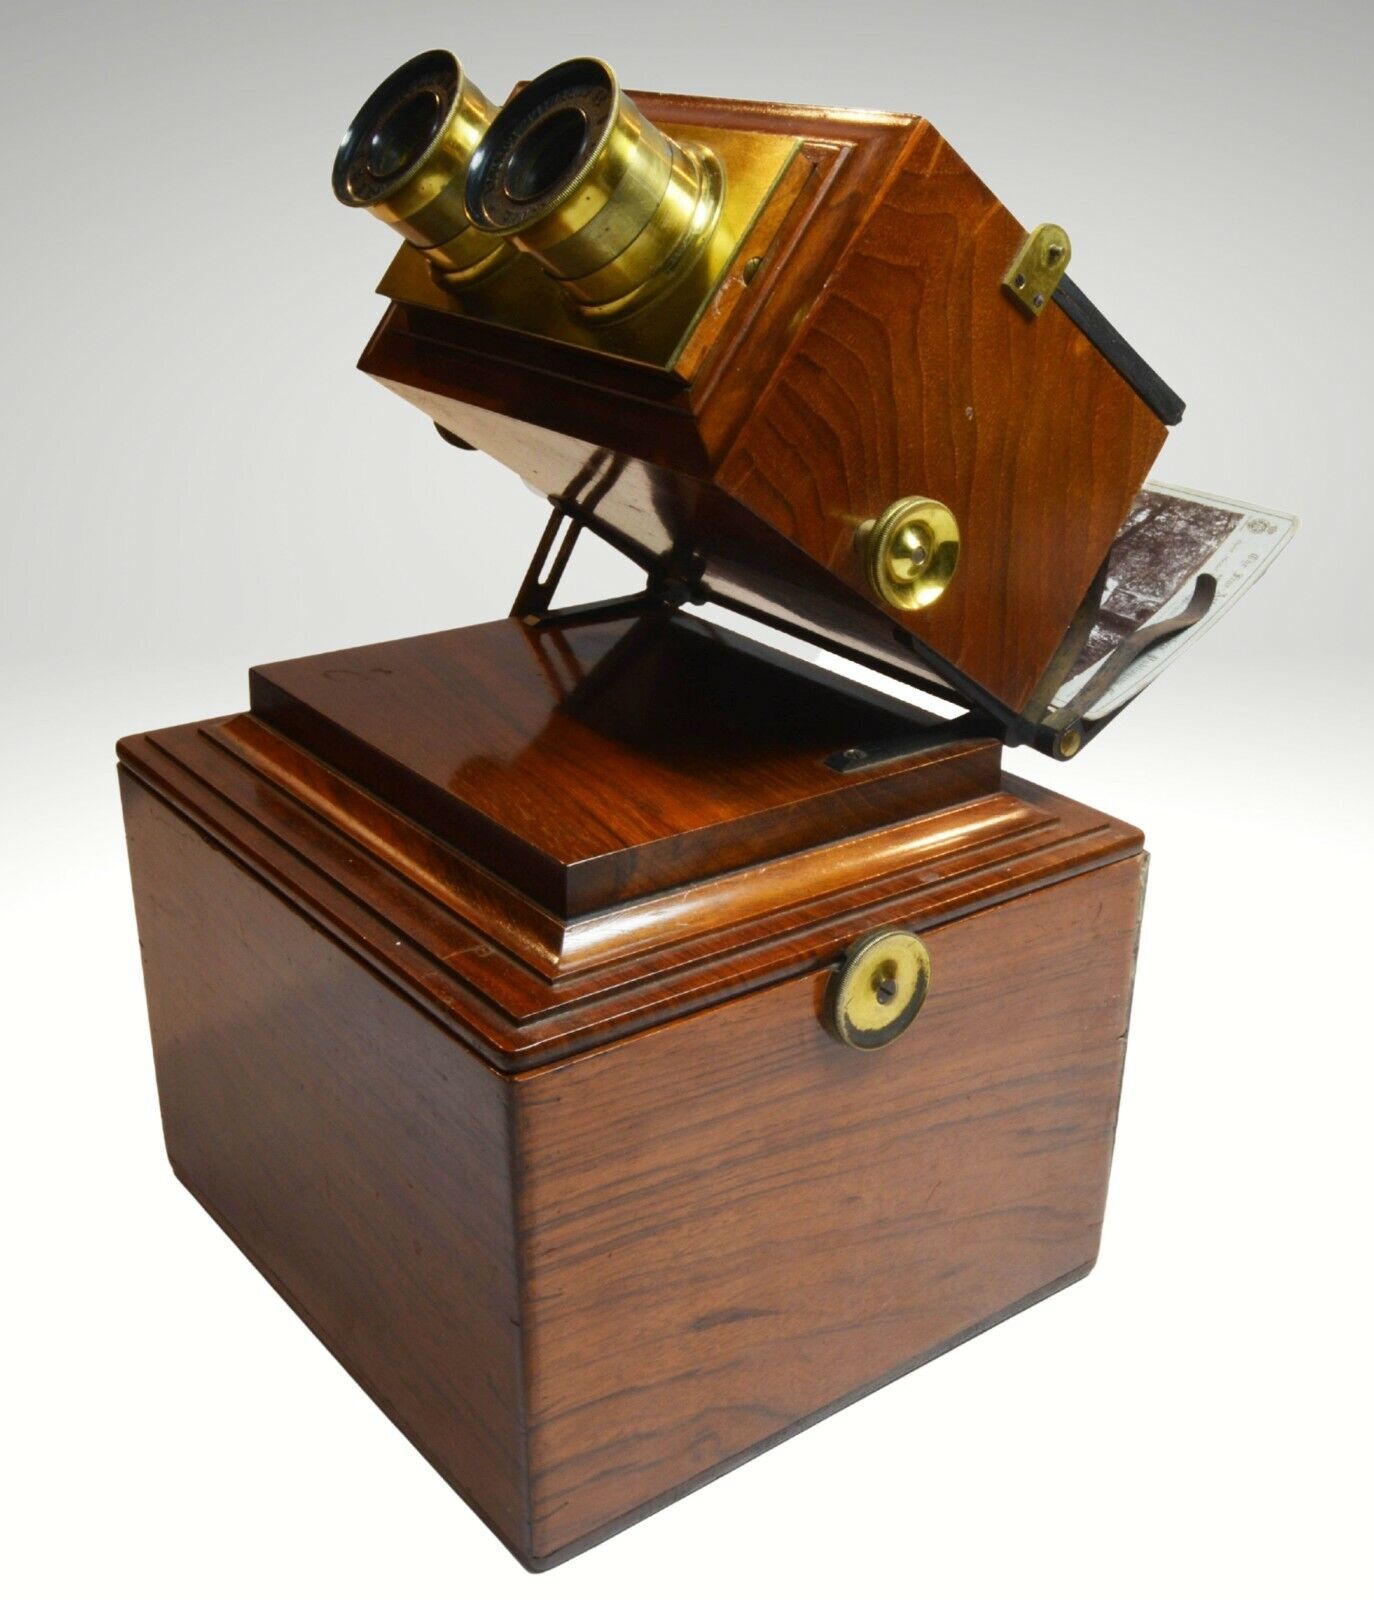 Antique stereoscope stereo viewer, tabletop, R & J Beck, London, 19th Century